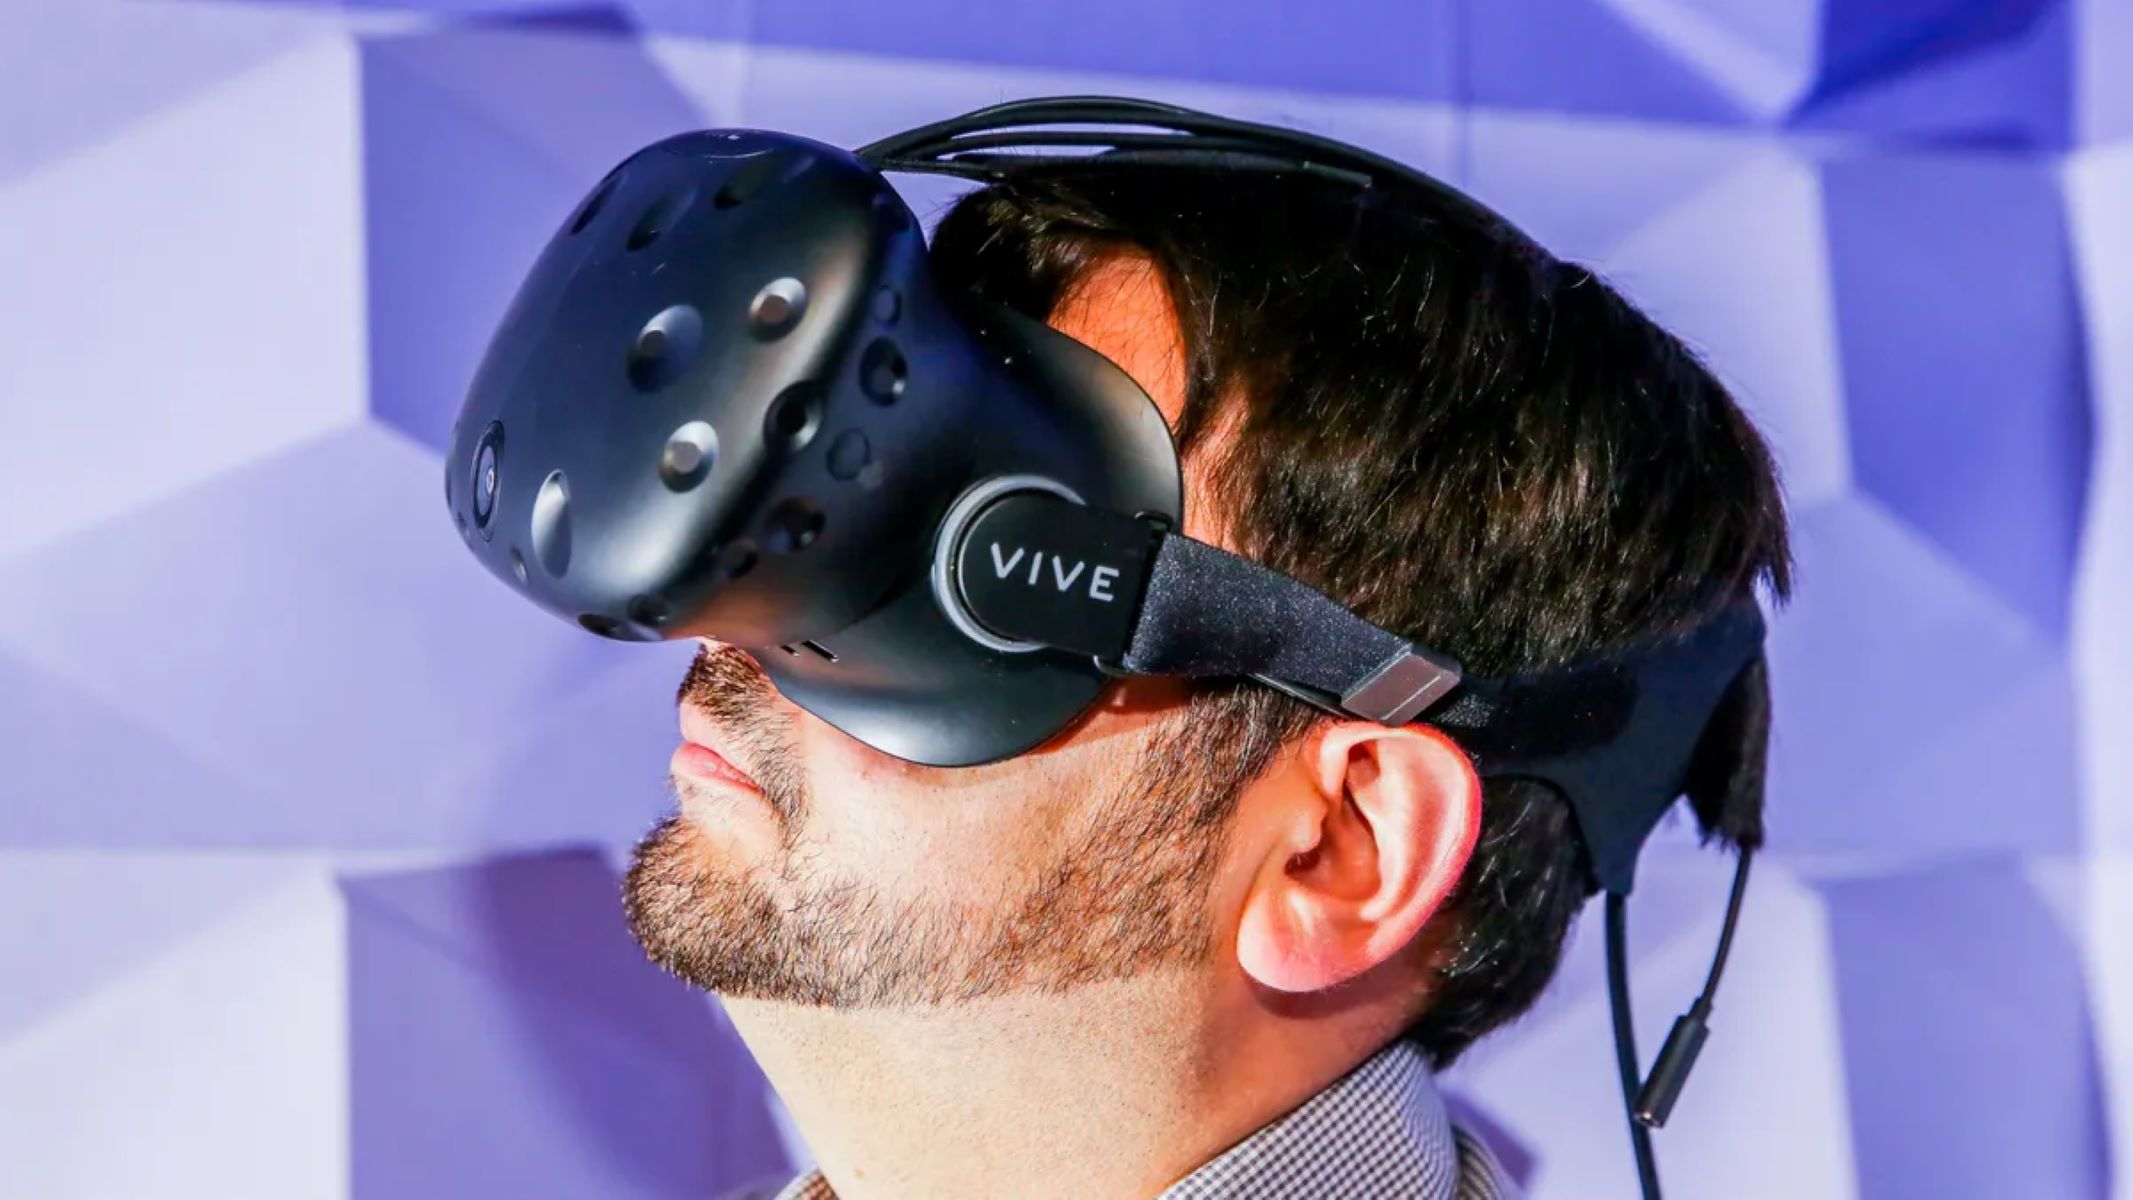 Which Company Created The HTC Vive